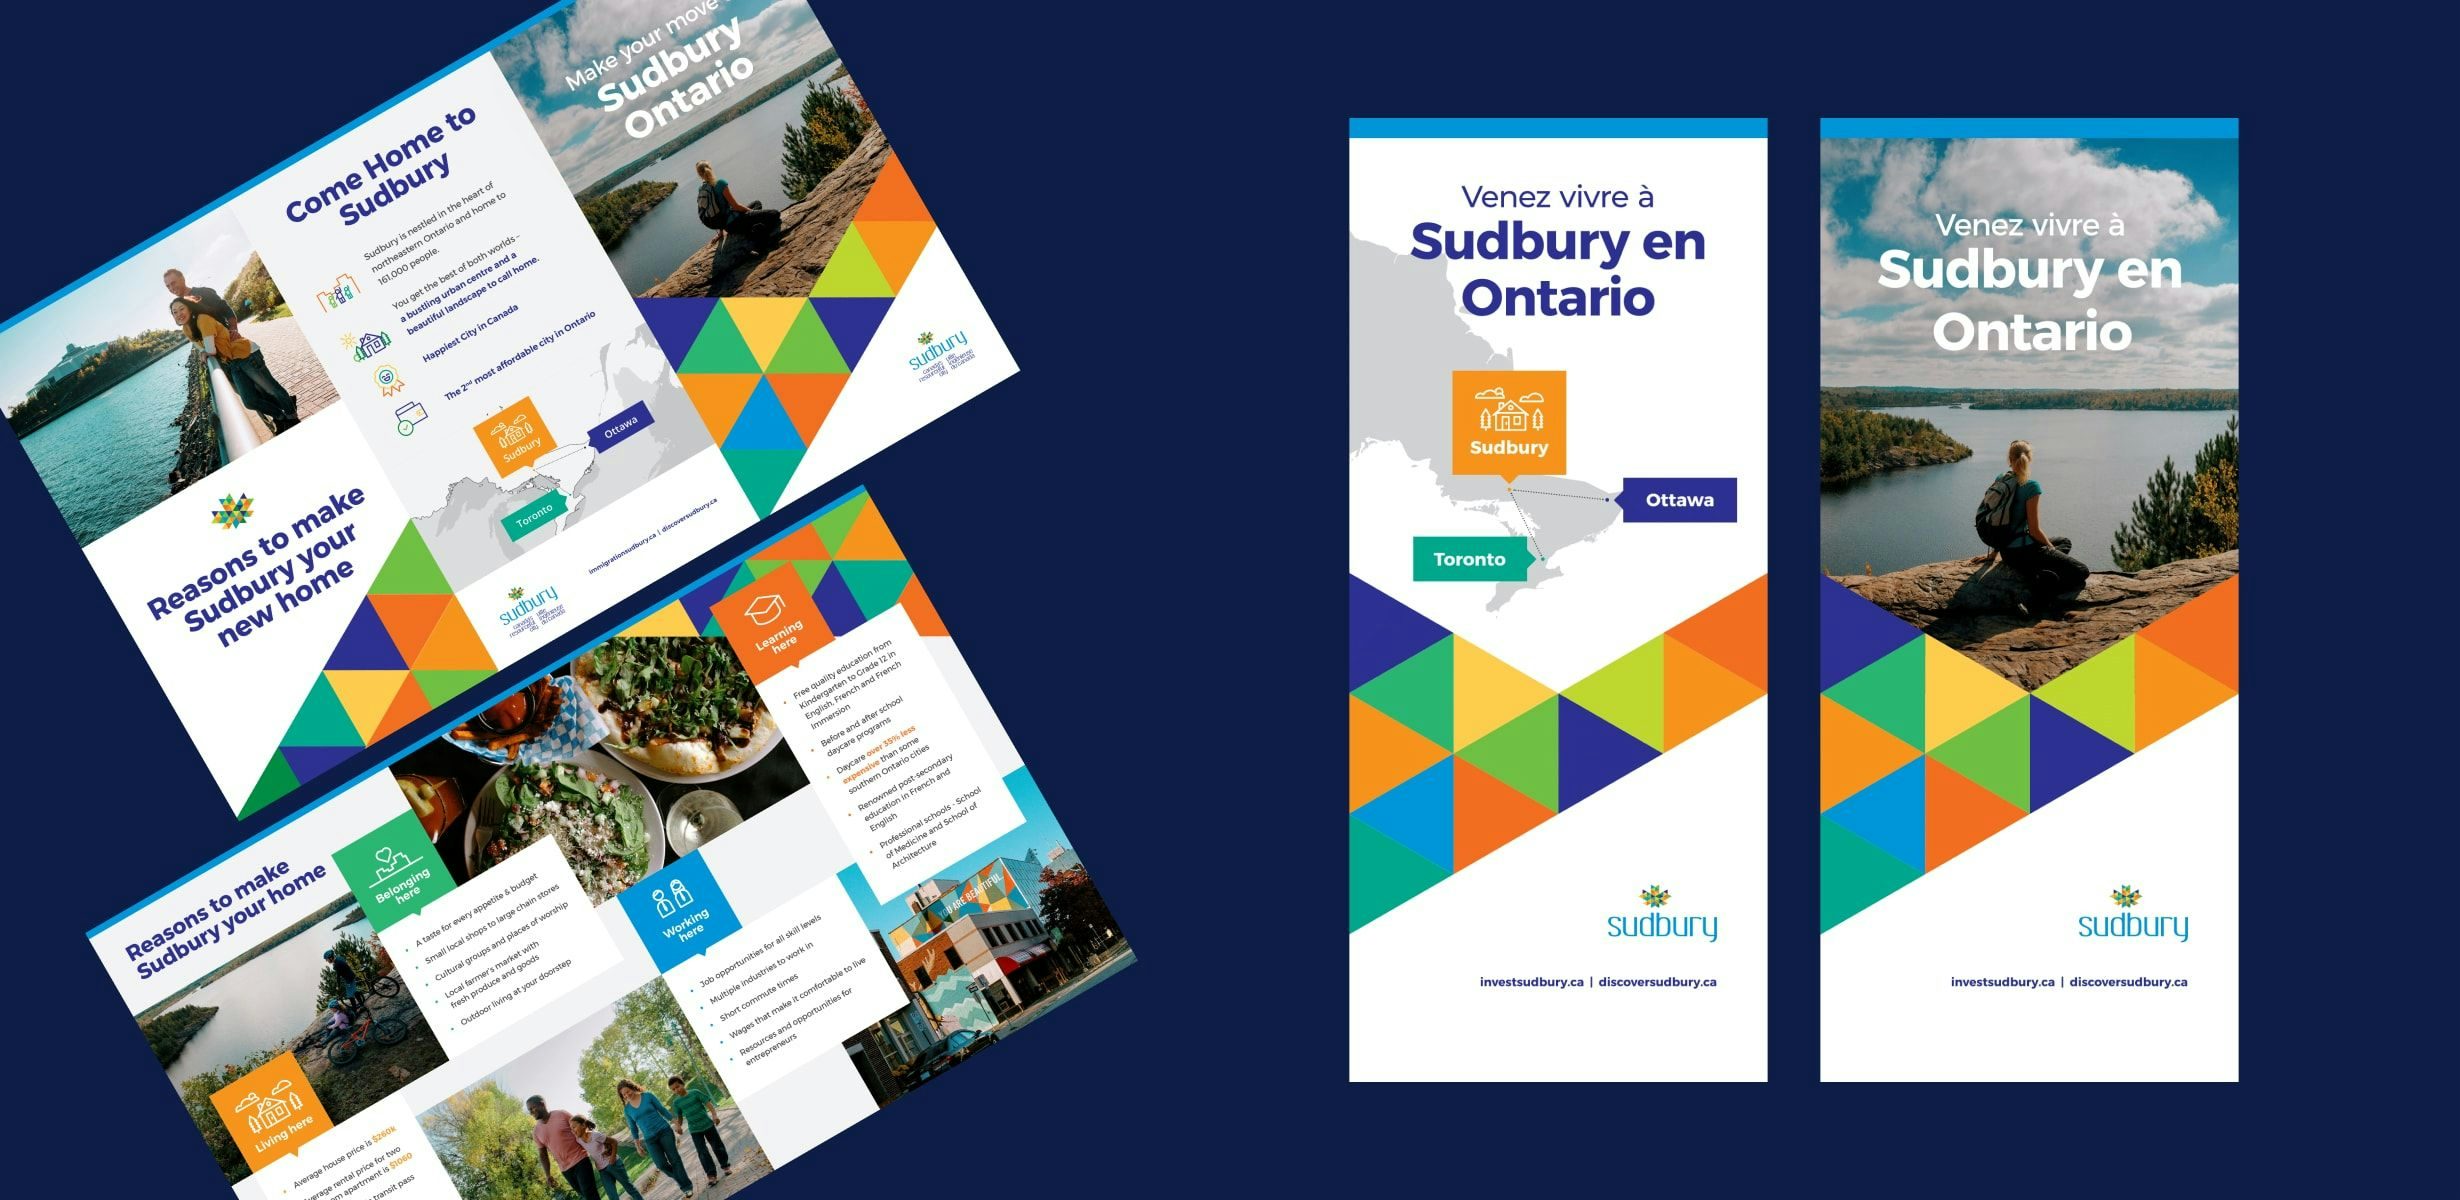 Economic Development brochures and banner designs for the City of Greater Sudbury